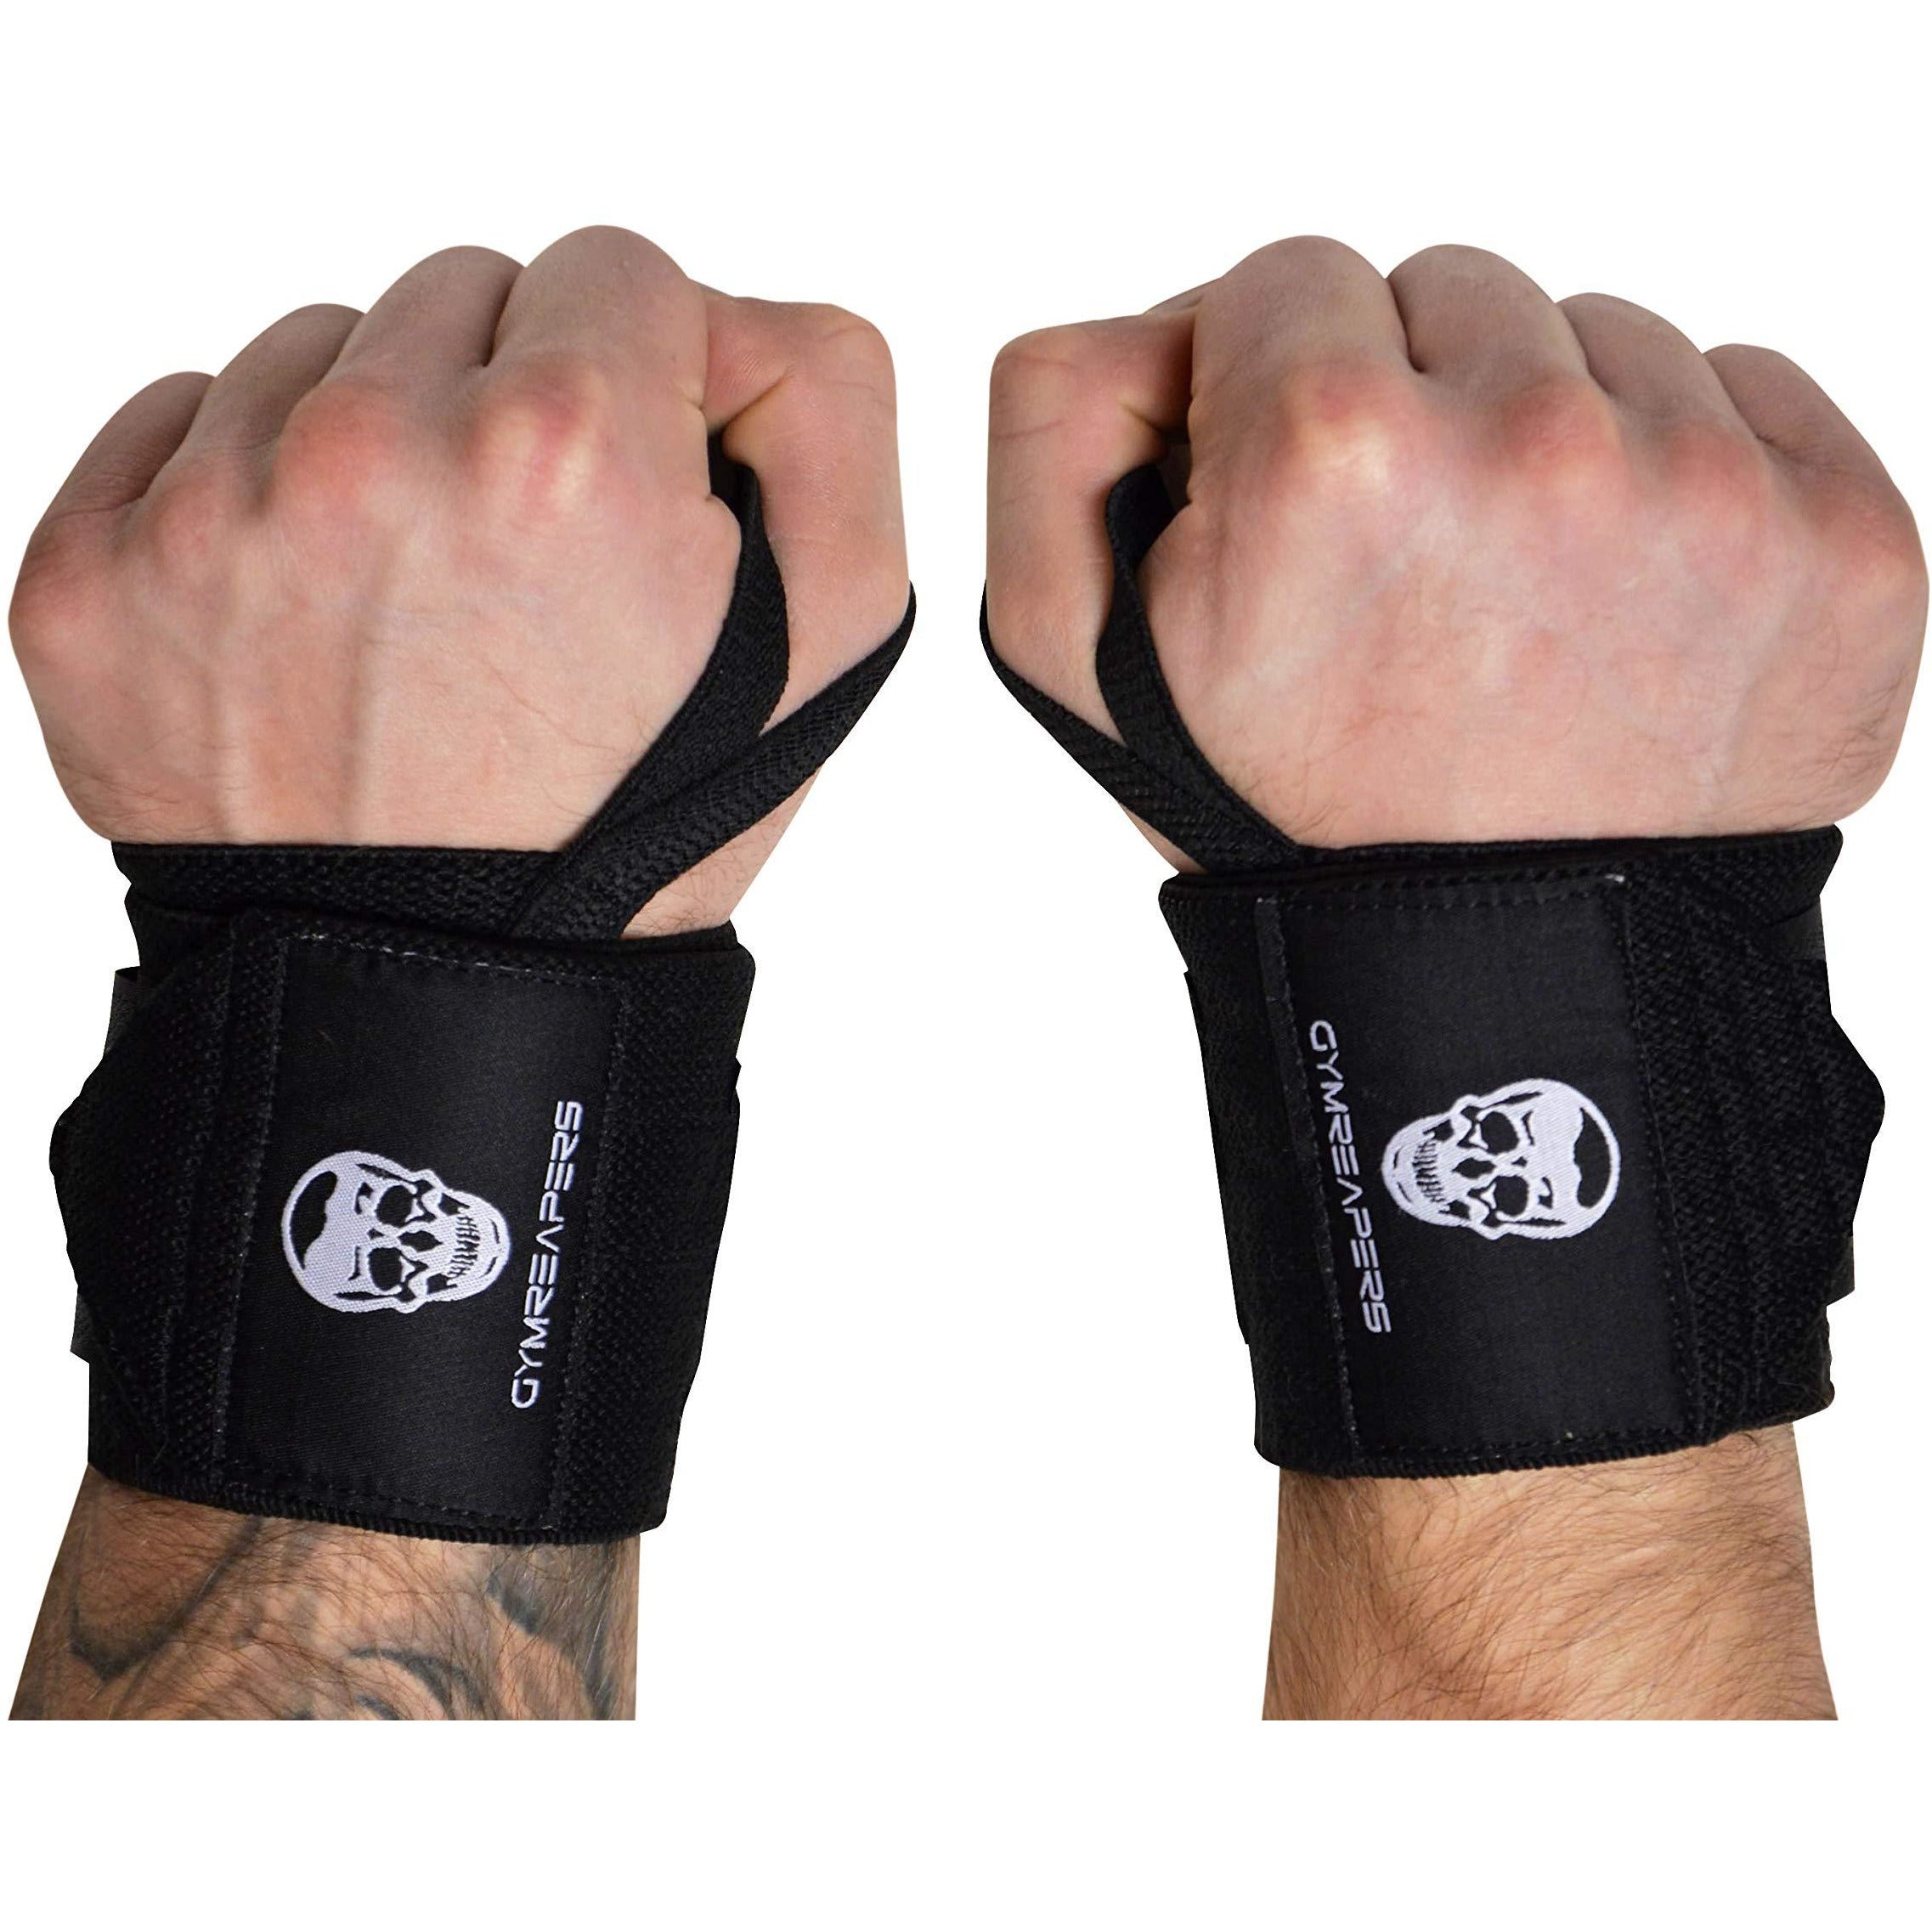 Gymreapers Weightlifting Wrist Wraps (Competition Grade) 18" Professional Quality Wrist Support with Heavy Duty Thumb Loop - Best Wrap for Powerlifting, Strength Training, Bodybuilding(Black,18")